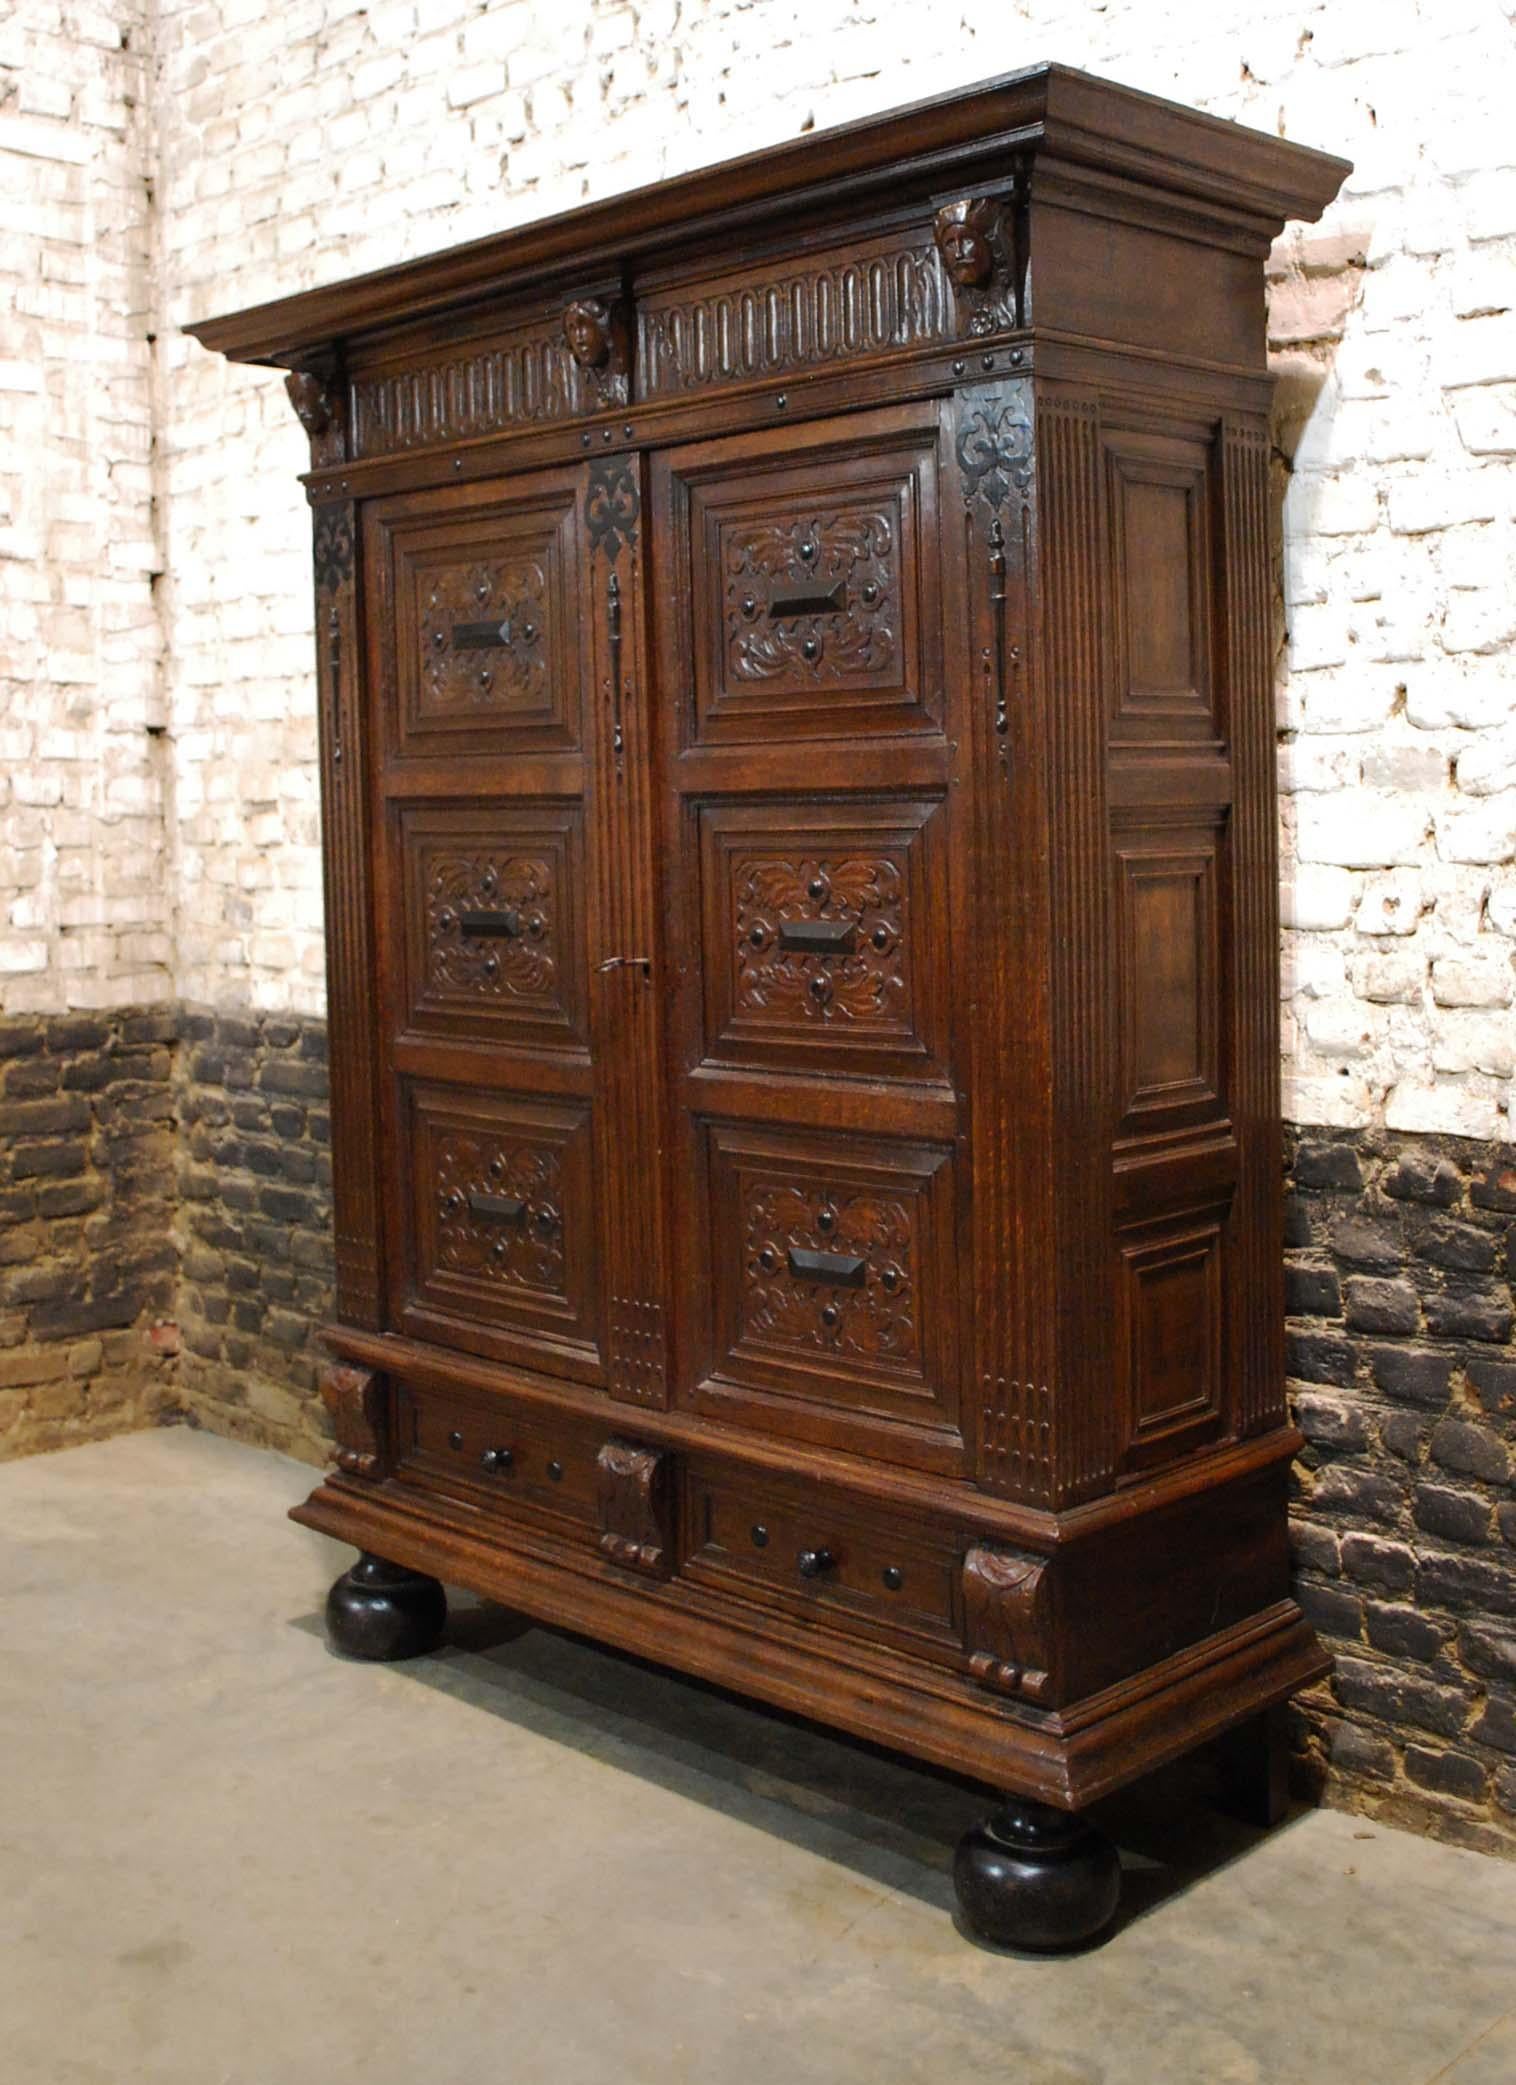 This extraordinary cupboard is made of the finest oak in the tradition of the Dutch Renaissance during the “Dutch golden age” It is a two-door cabinet with one drawer over large bun feet. This cabinet is made in the Provence of “Gelre” circa 1650.